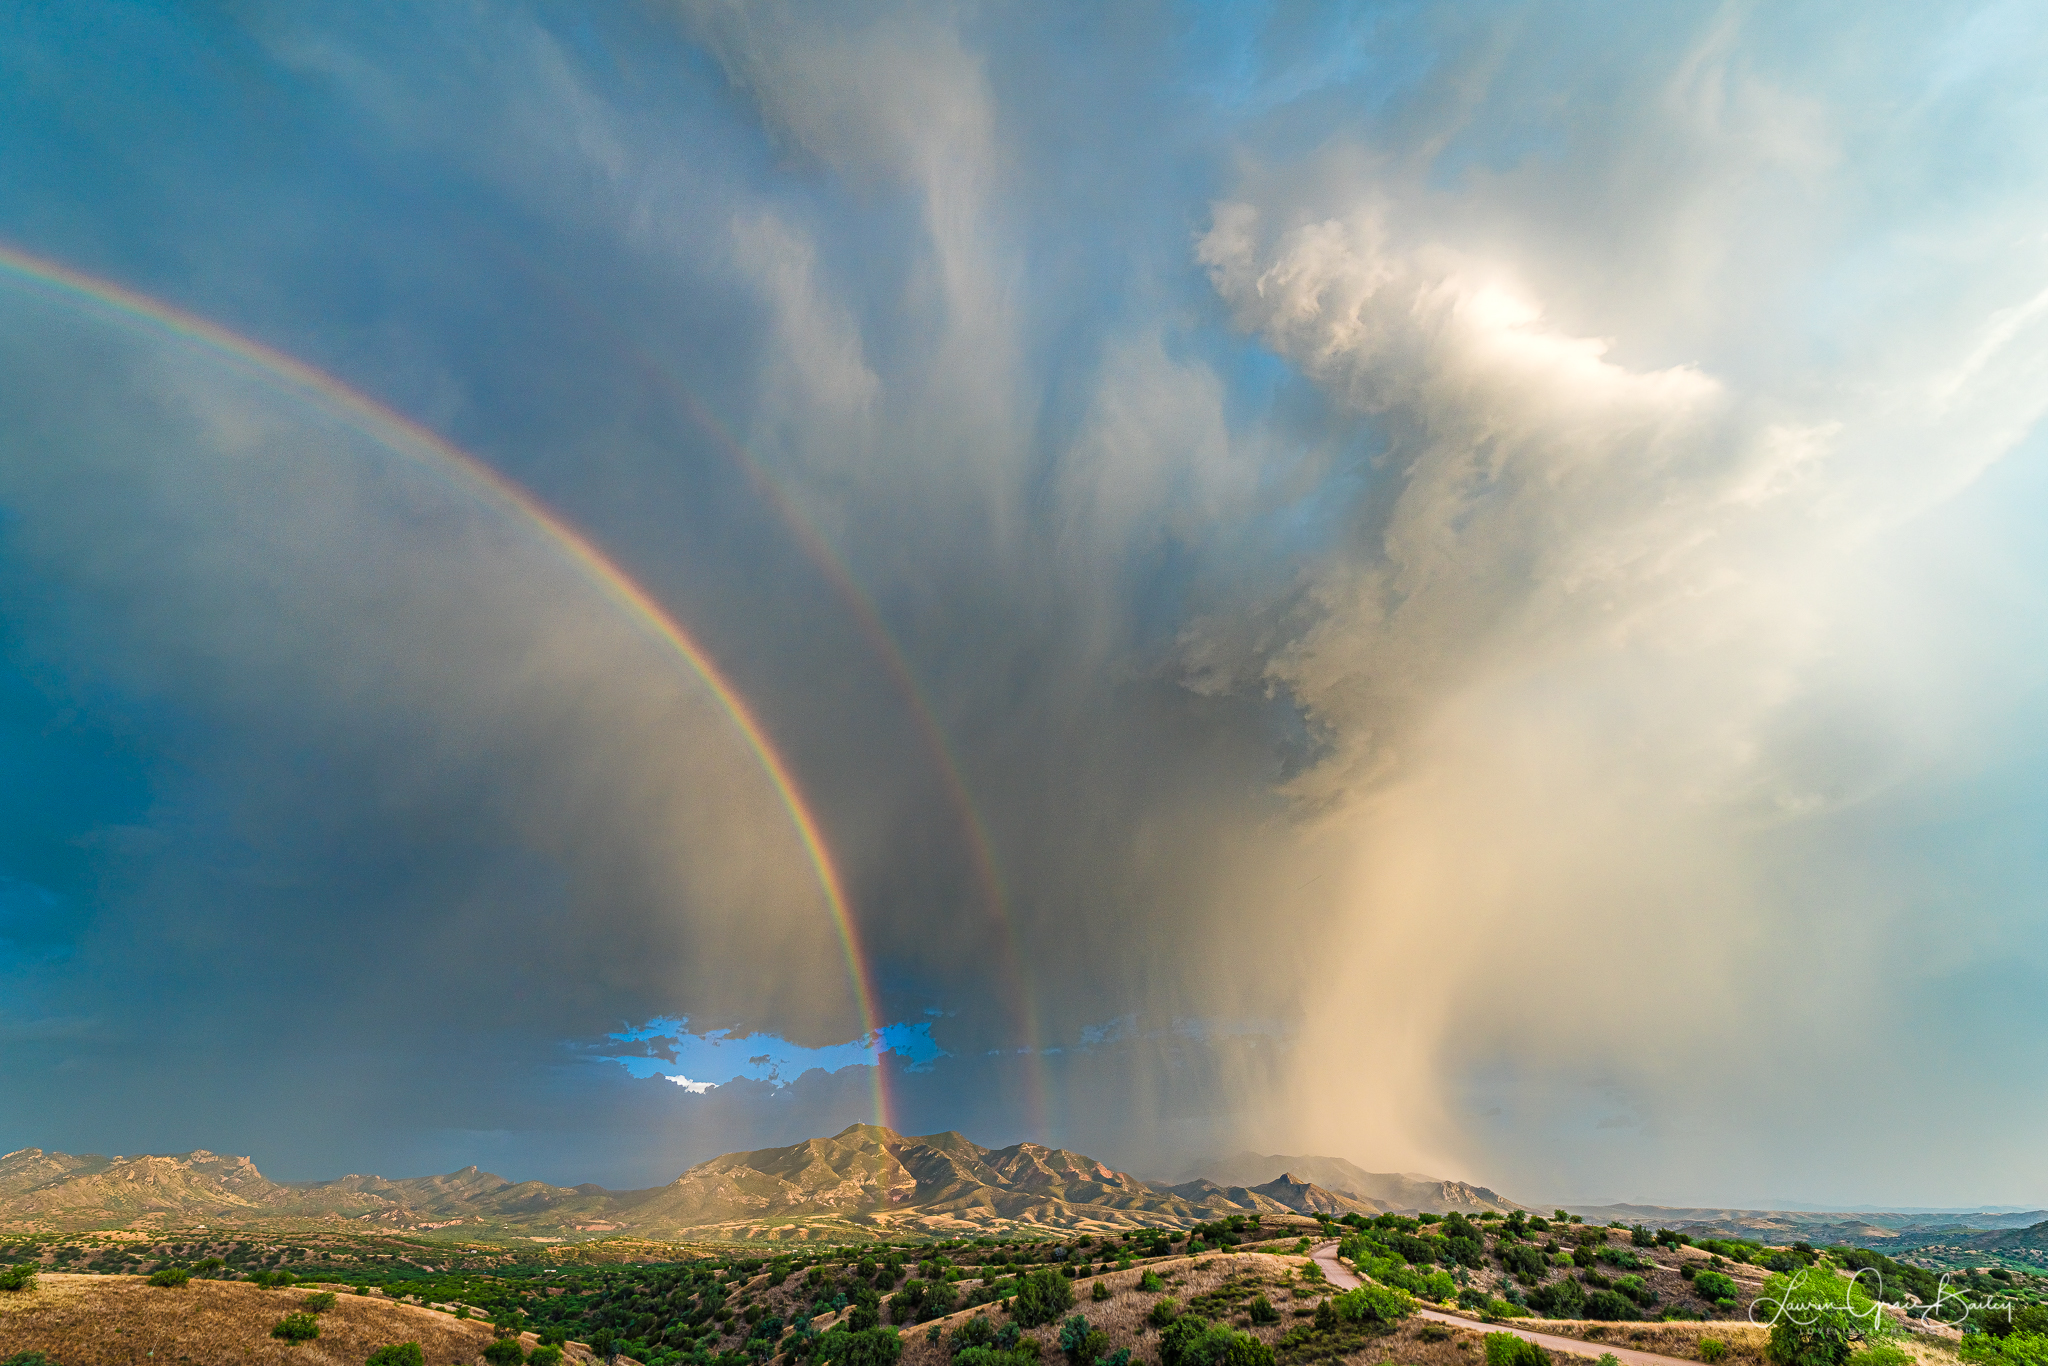 3rd Place Symmetrical rainbow and storm over Patagonia, Arizona by Lori Grace Bailey @lorigraceaz